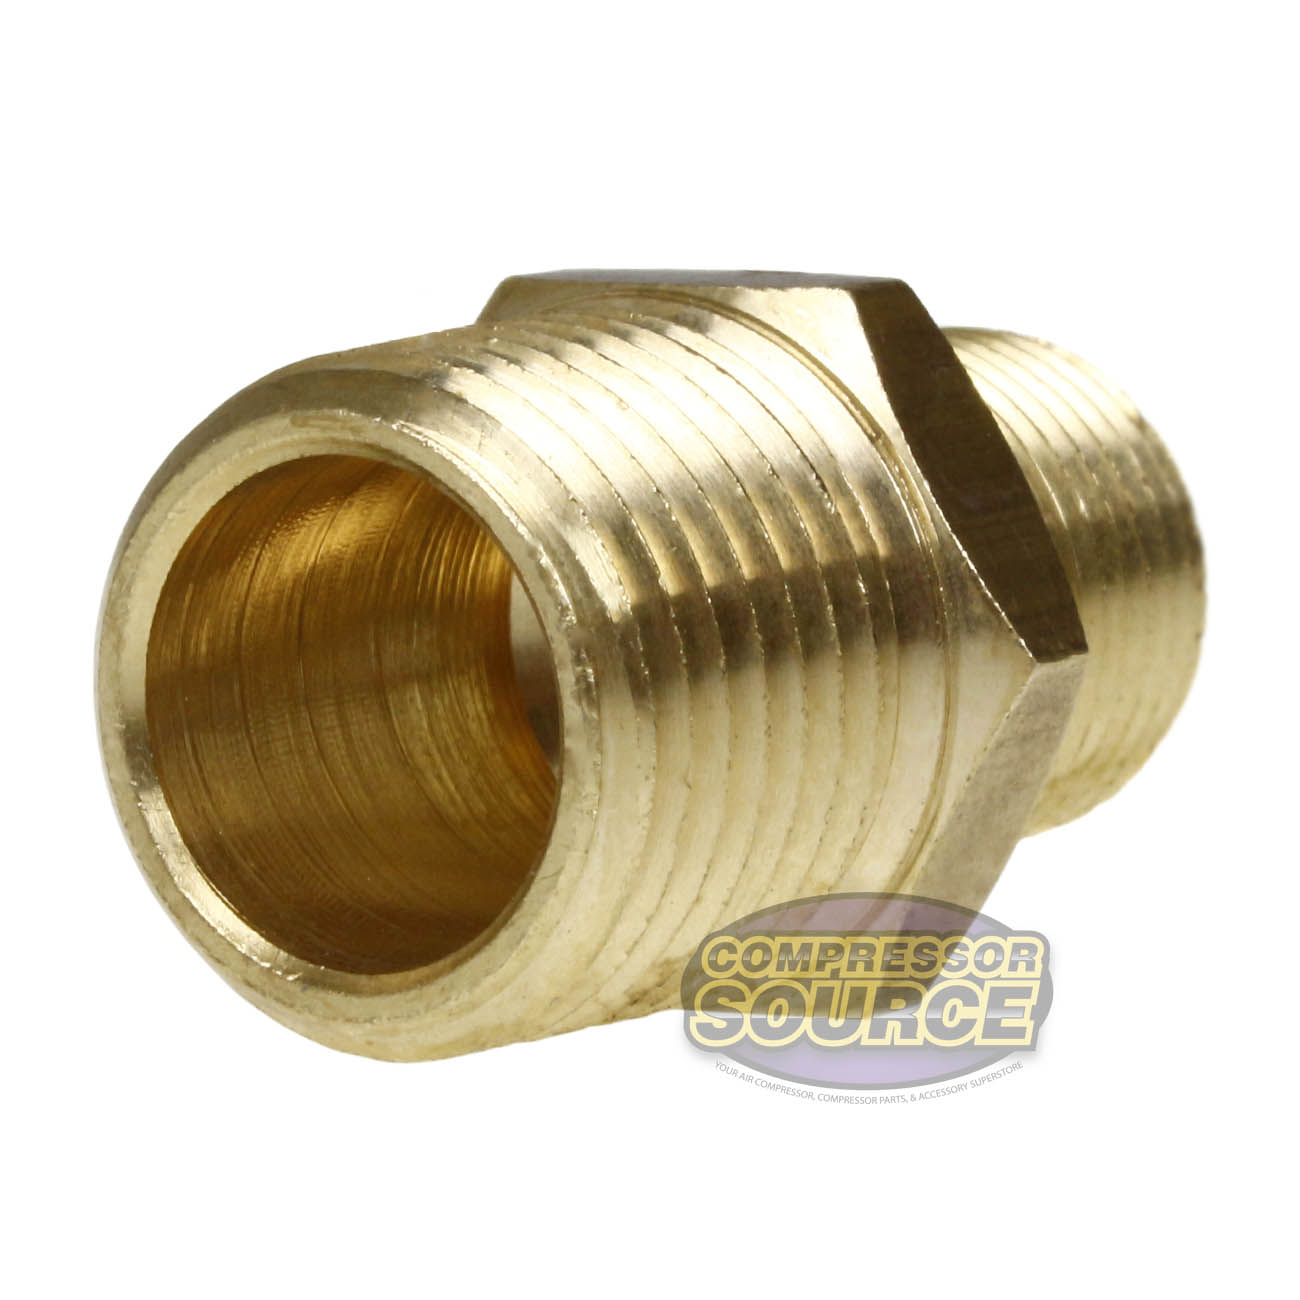 2 Pack 1/2" x 3/8" Male NPTF Pipe Reducing Hex Nipple Solid Brass Pipe Fitting